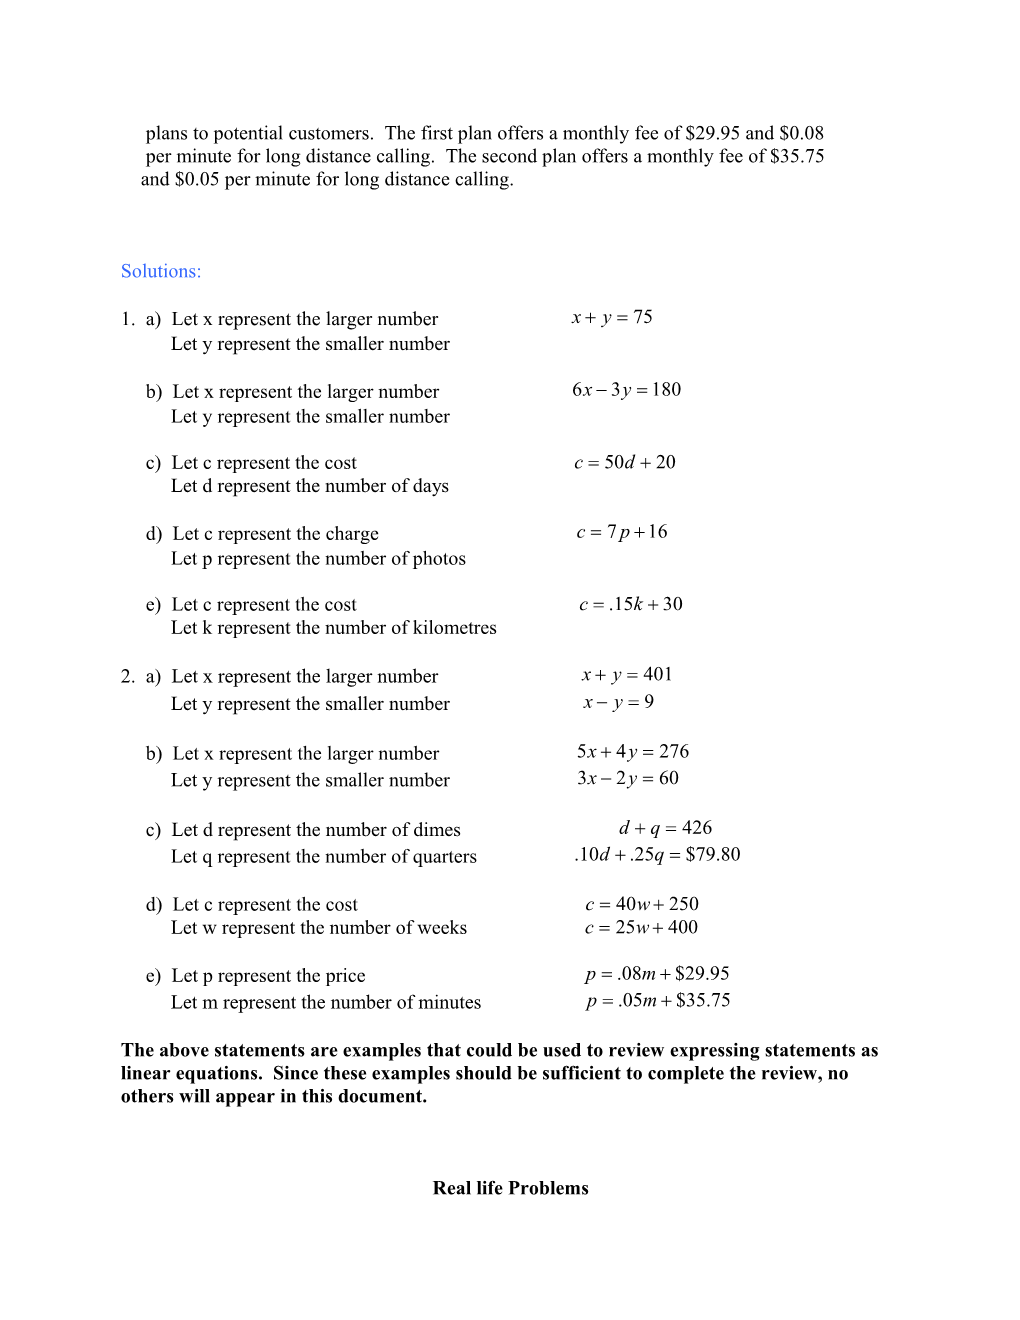 Systems of Linear Equations s1